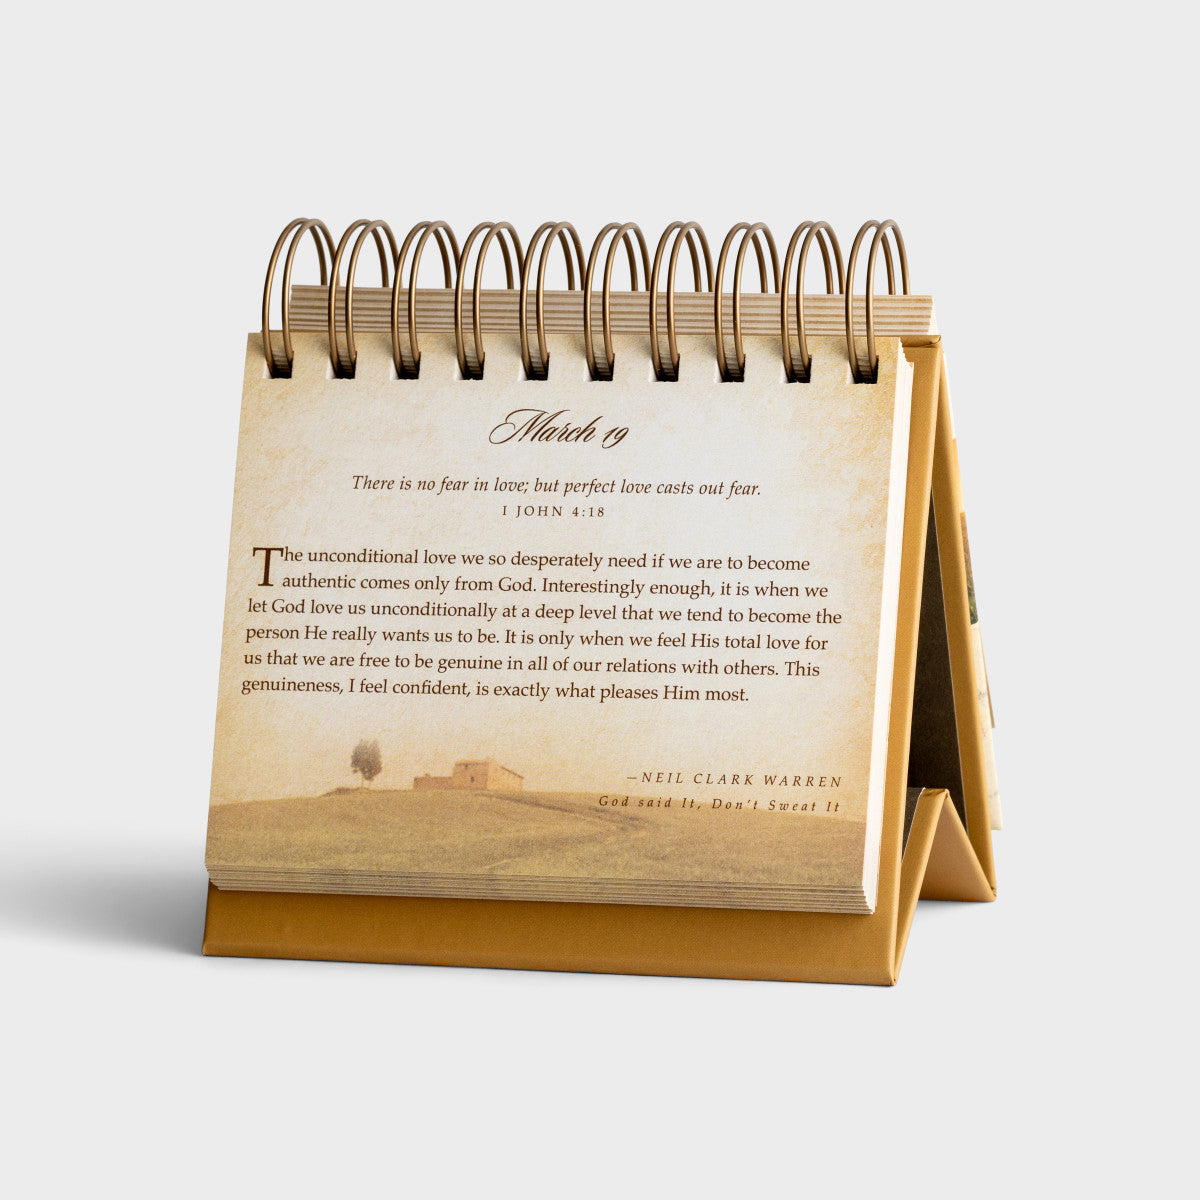 God's Promises Day by Day  - 365 Day Inspirational DayBrightener - The Christian Gift Company